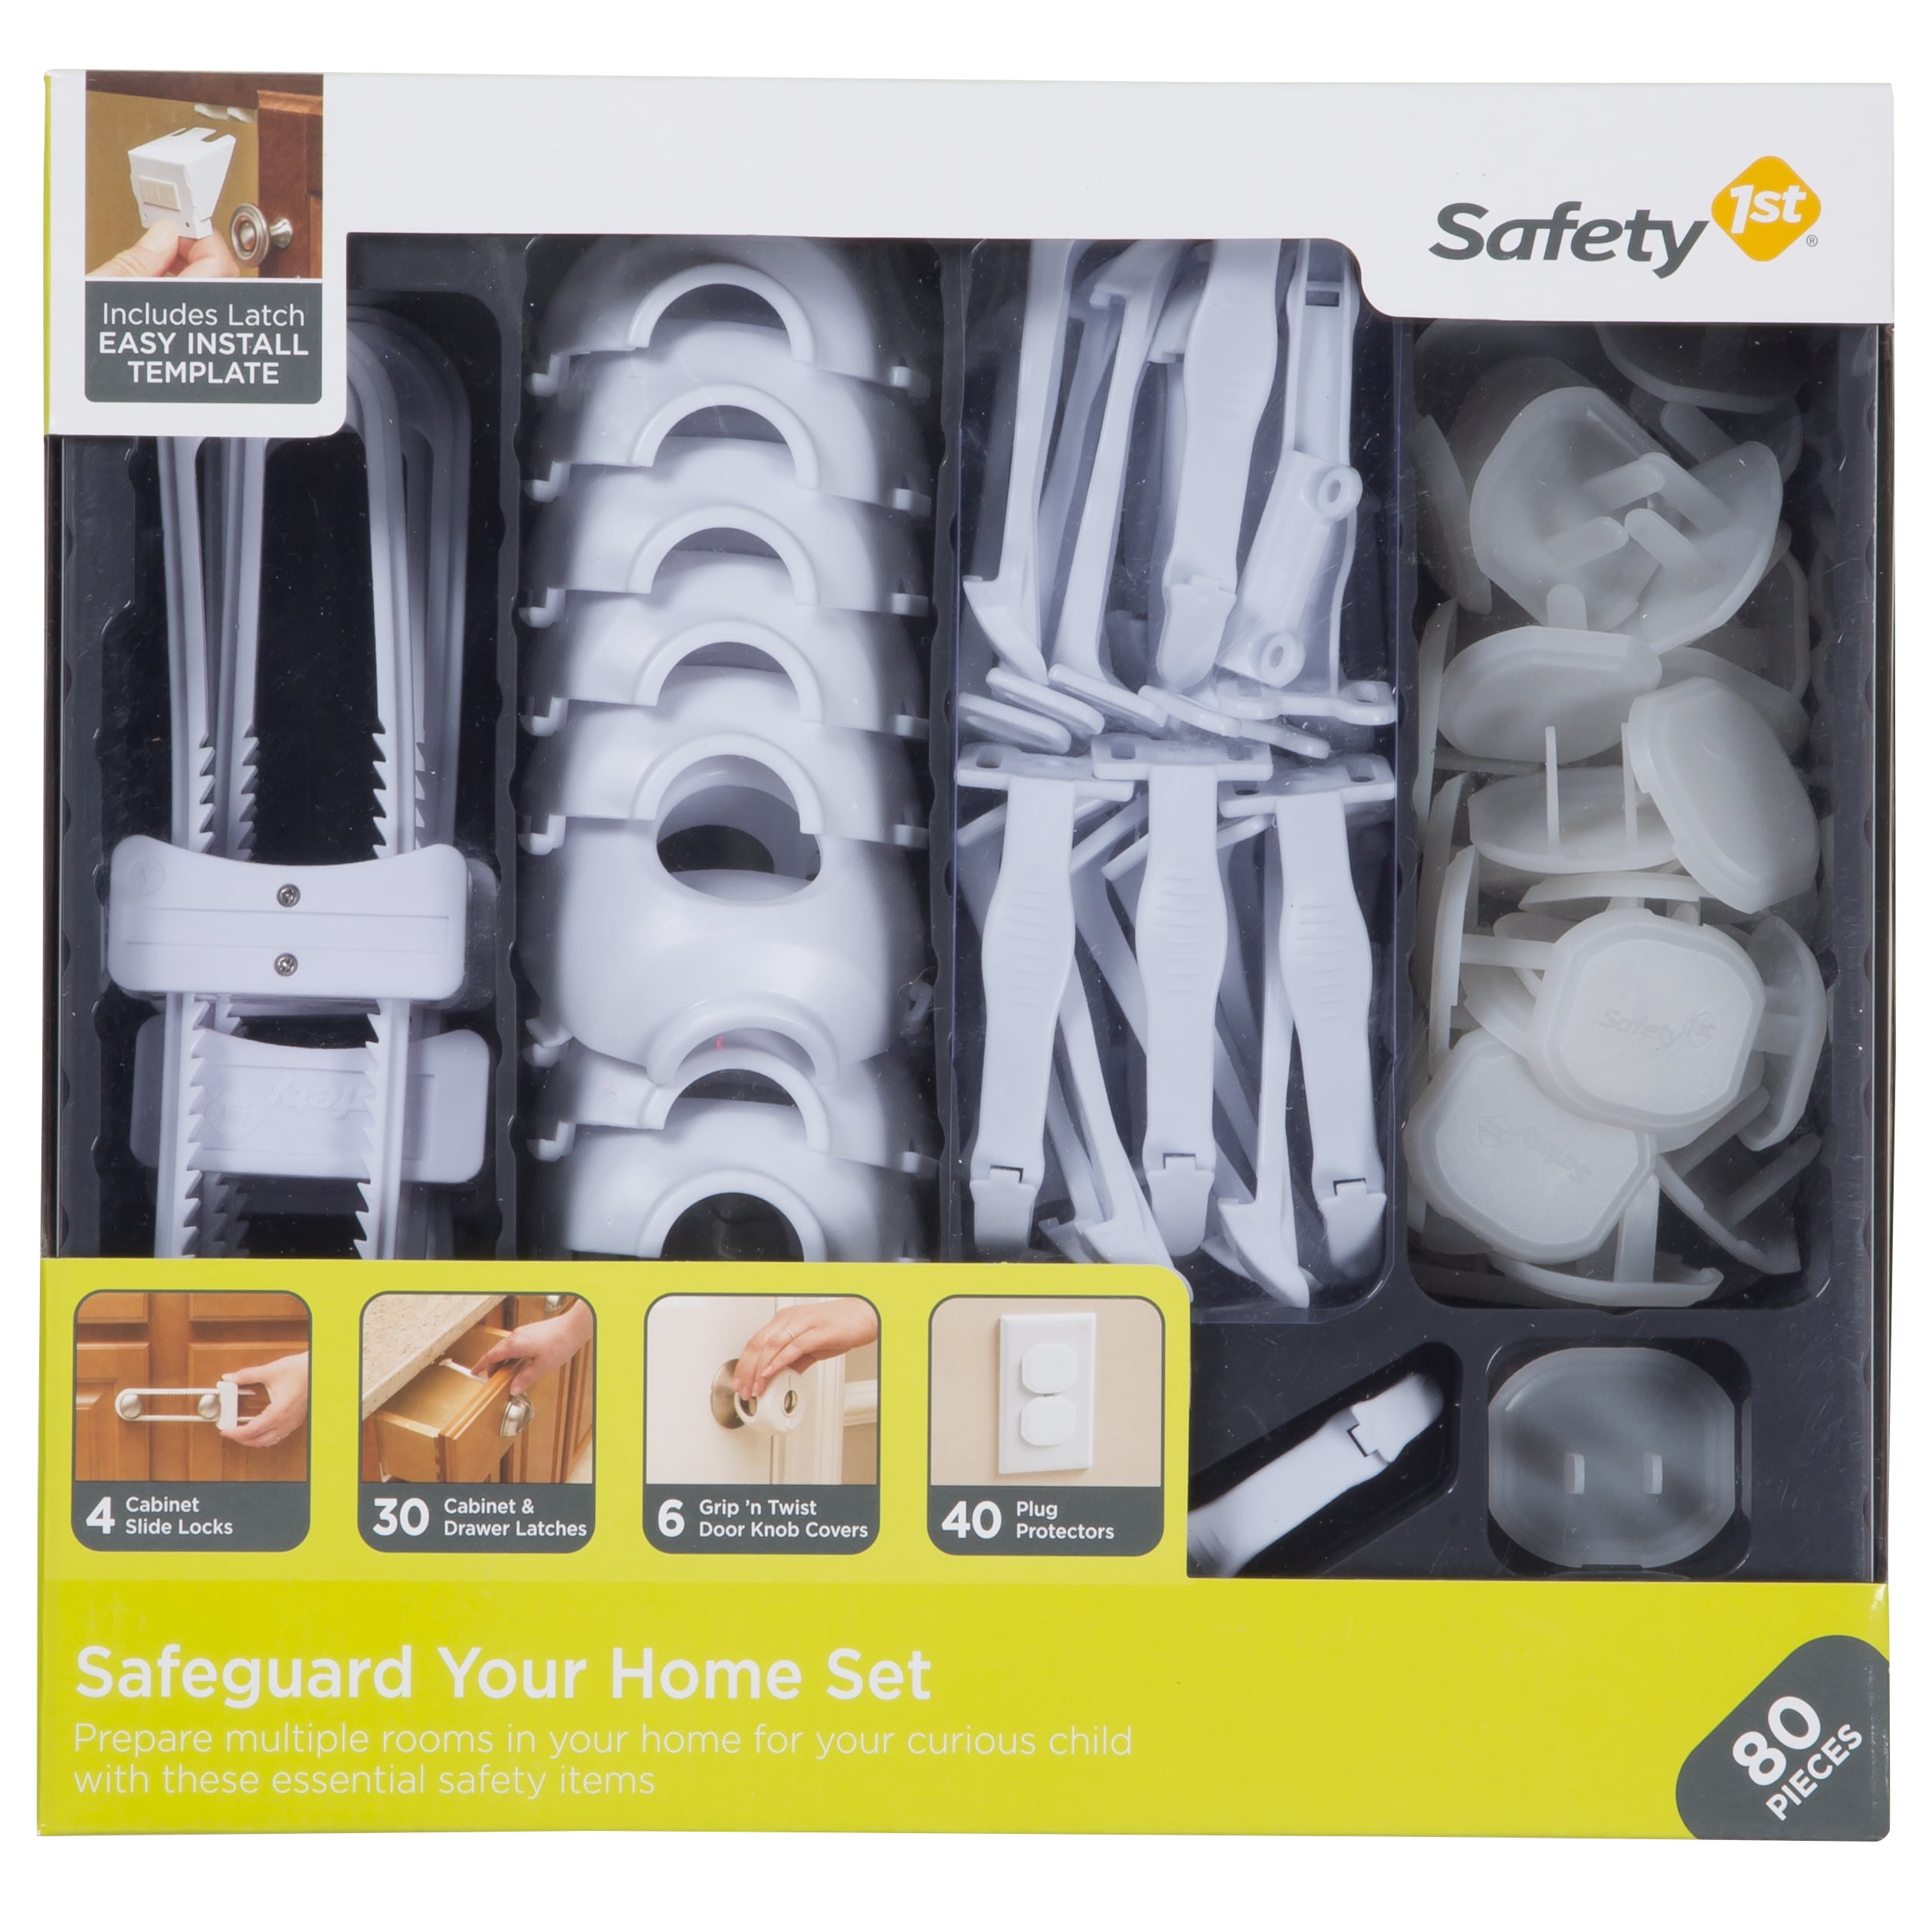 Safety 1st Home Safeguarding And Childproofing Set 80 Pcs White